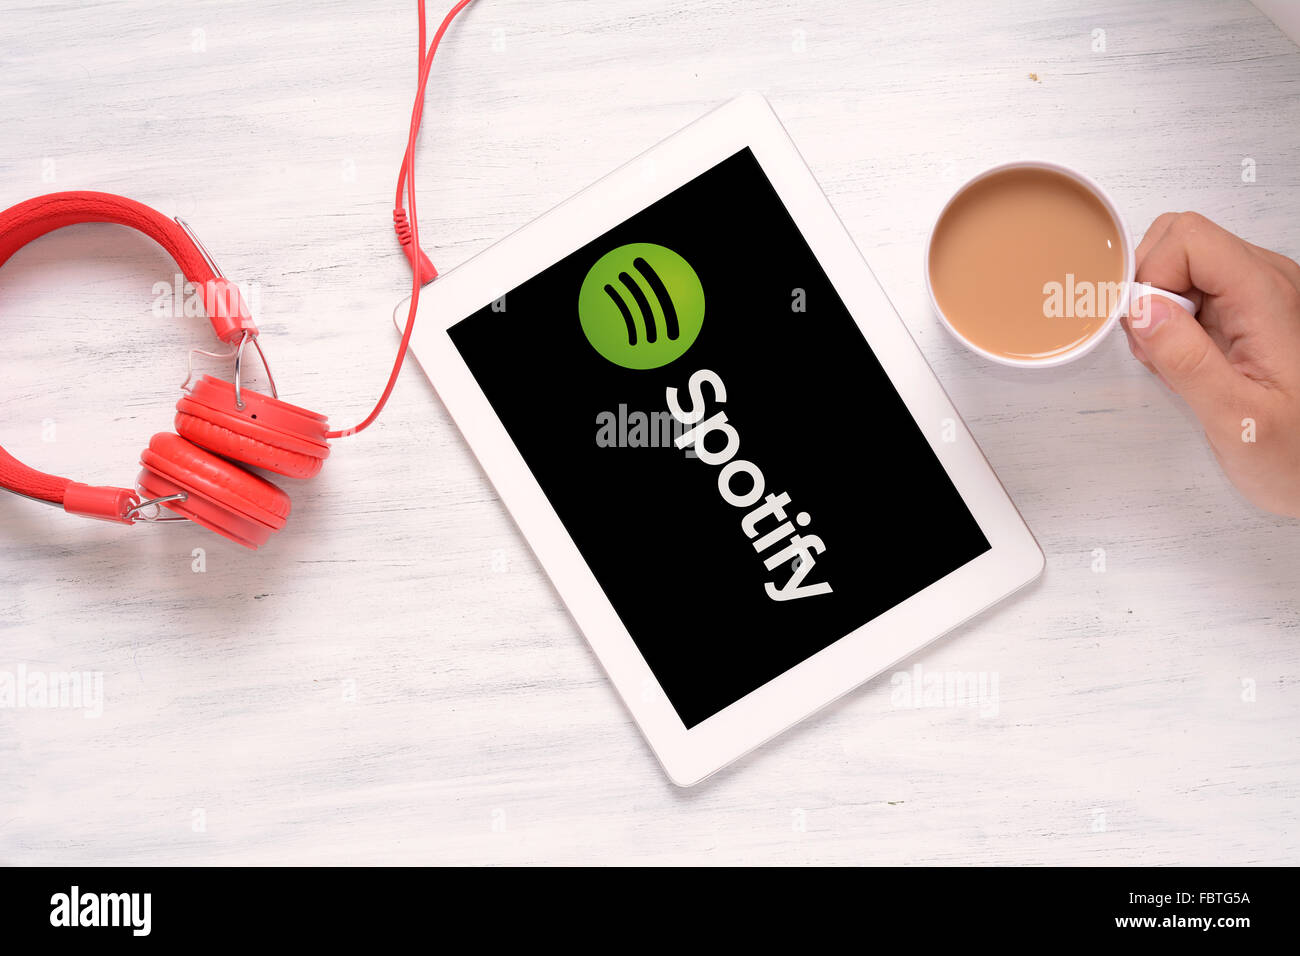 Buenos Aires, Argentina - January 2016: Top view of tablet with Spotify logo on the screen. Taken in Argentina. Stock Photo